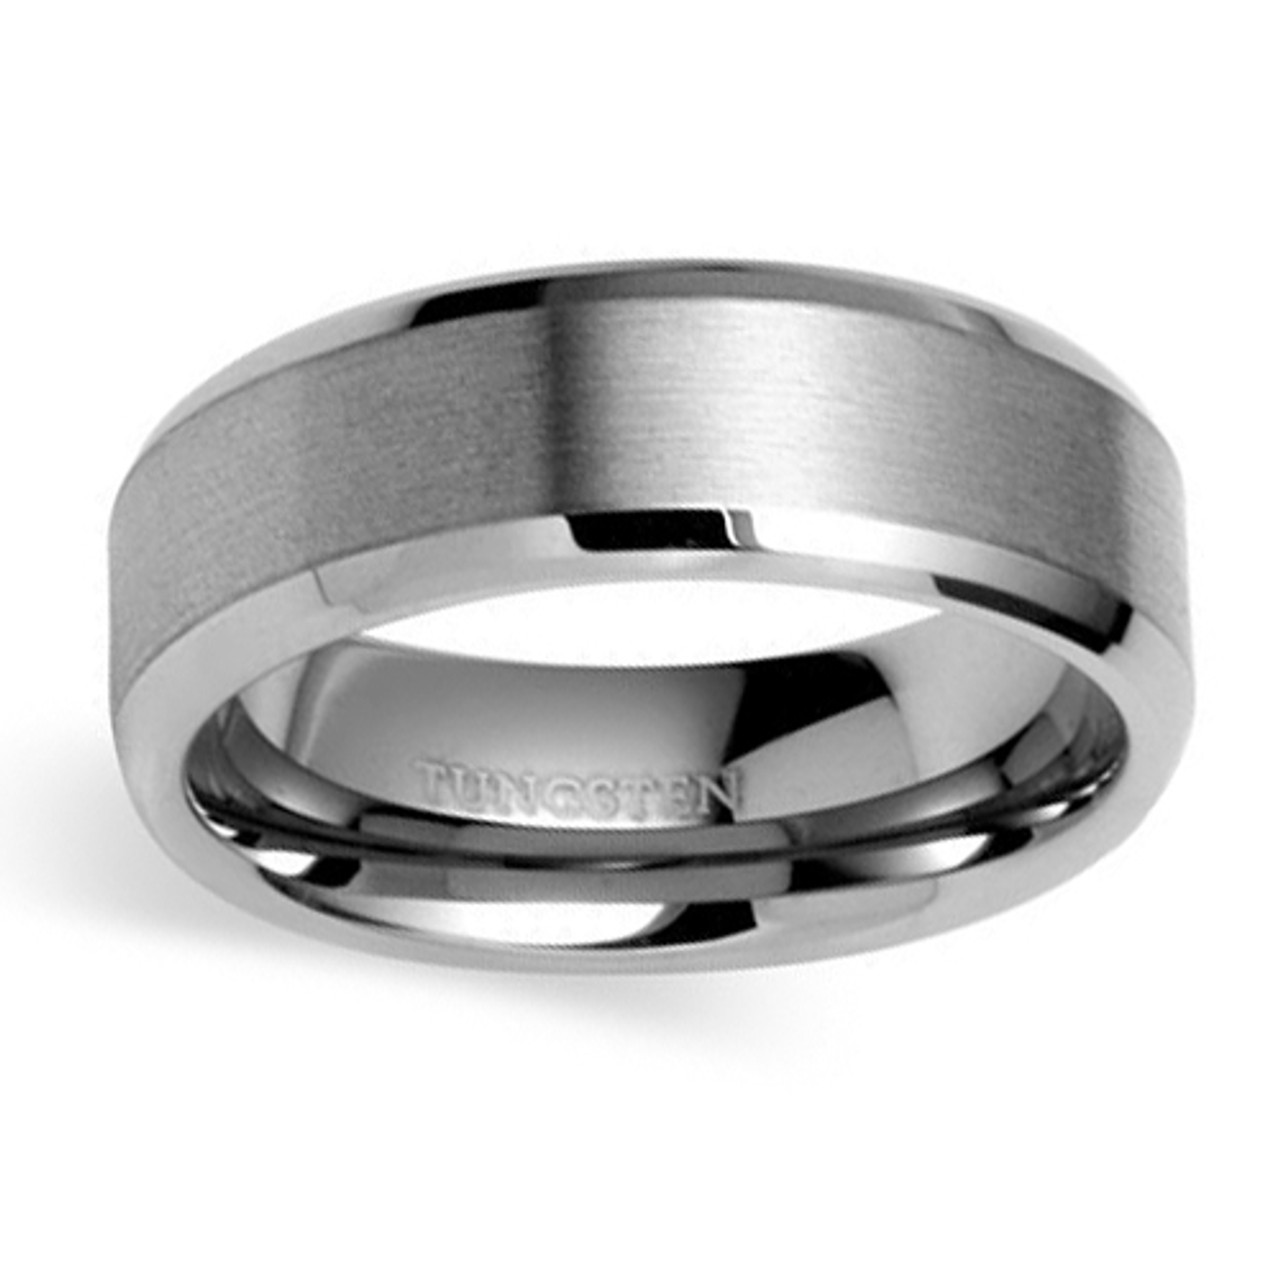 (8mm) Unisex or Men's Silver Tone Tungsten Carbide Wedding Ring Bands. Matte Finish with Beveled Edges and Comfort Fit.